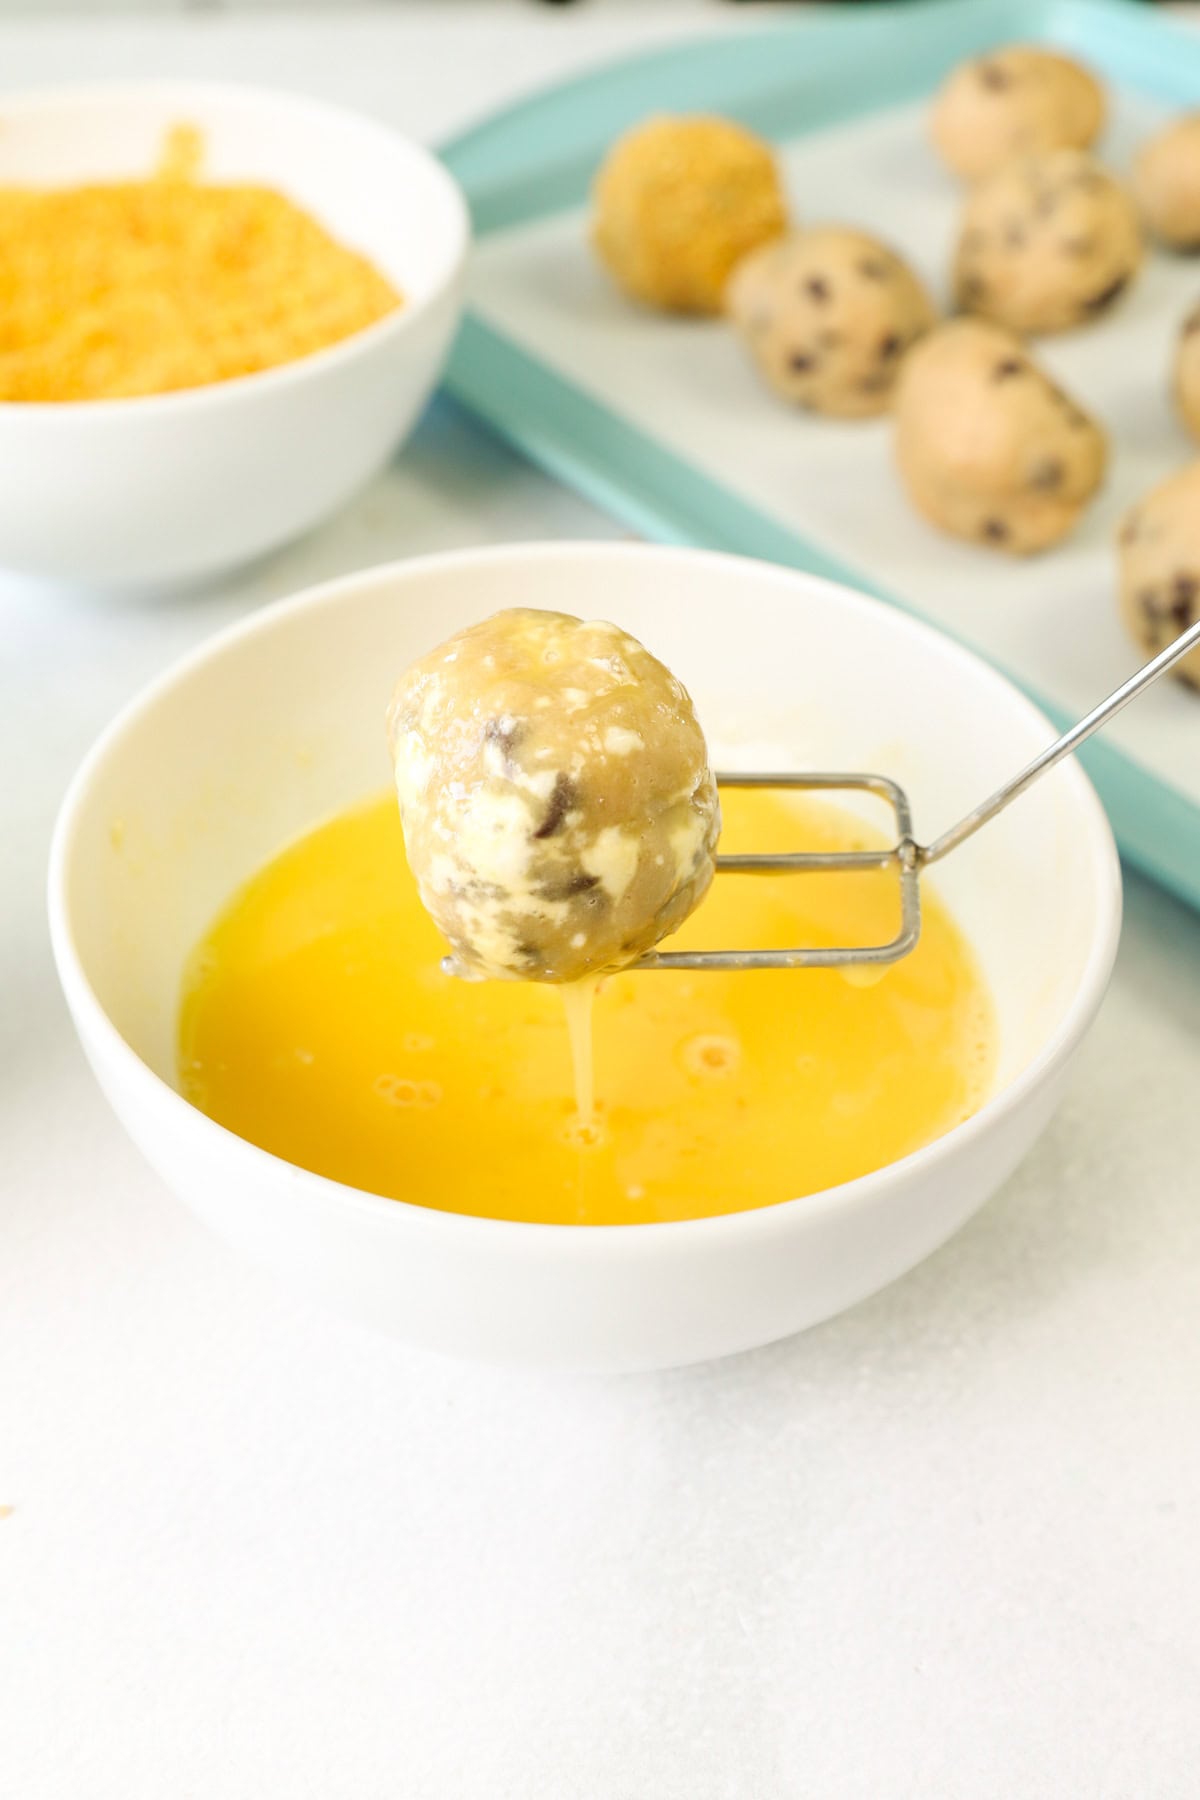 A cookie dough ball being lifted from a small bowl of egg wash.